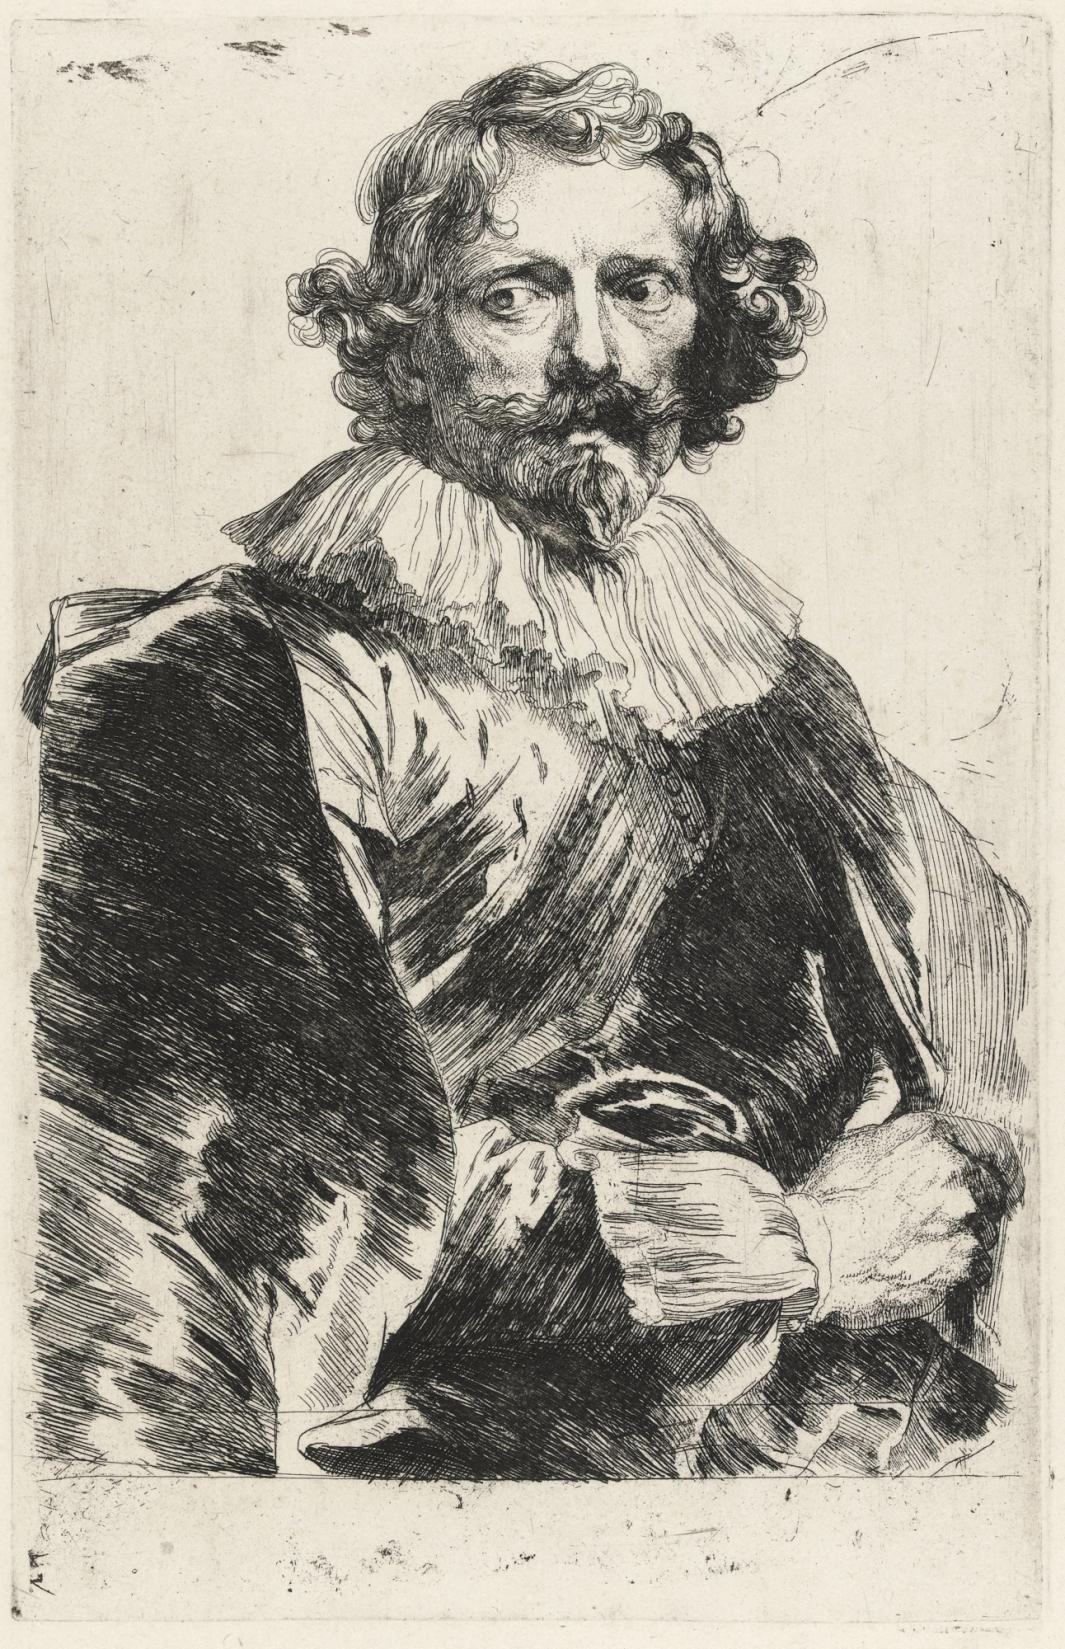 etching of portrait of man with ruffle collar, curly hair and mustache and beard